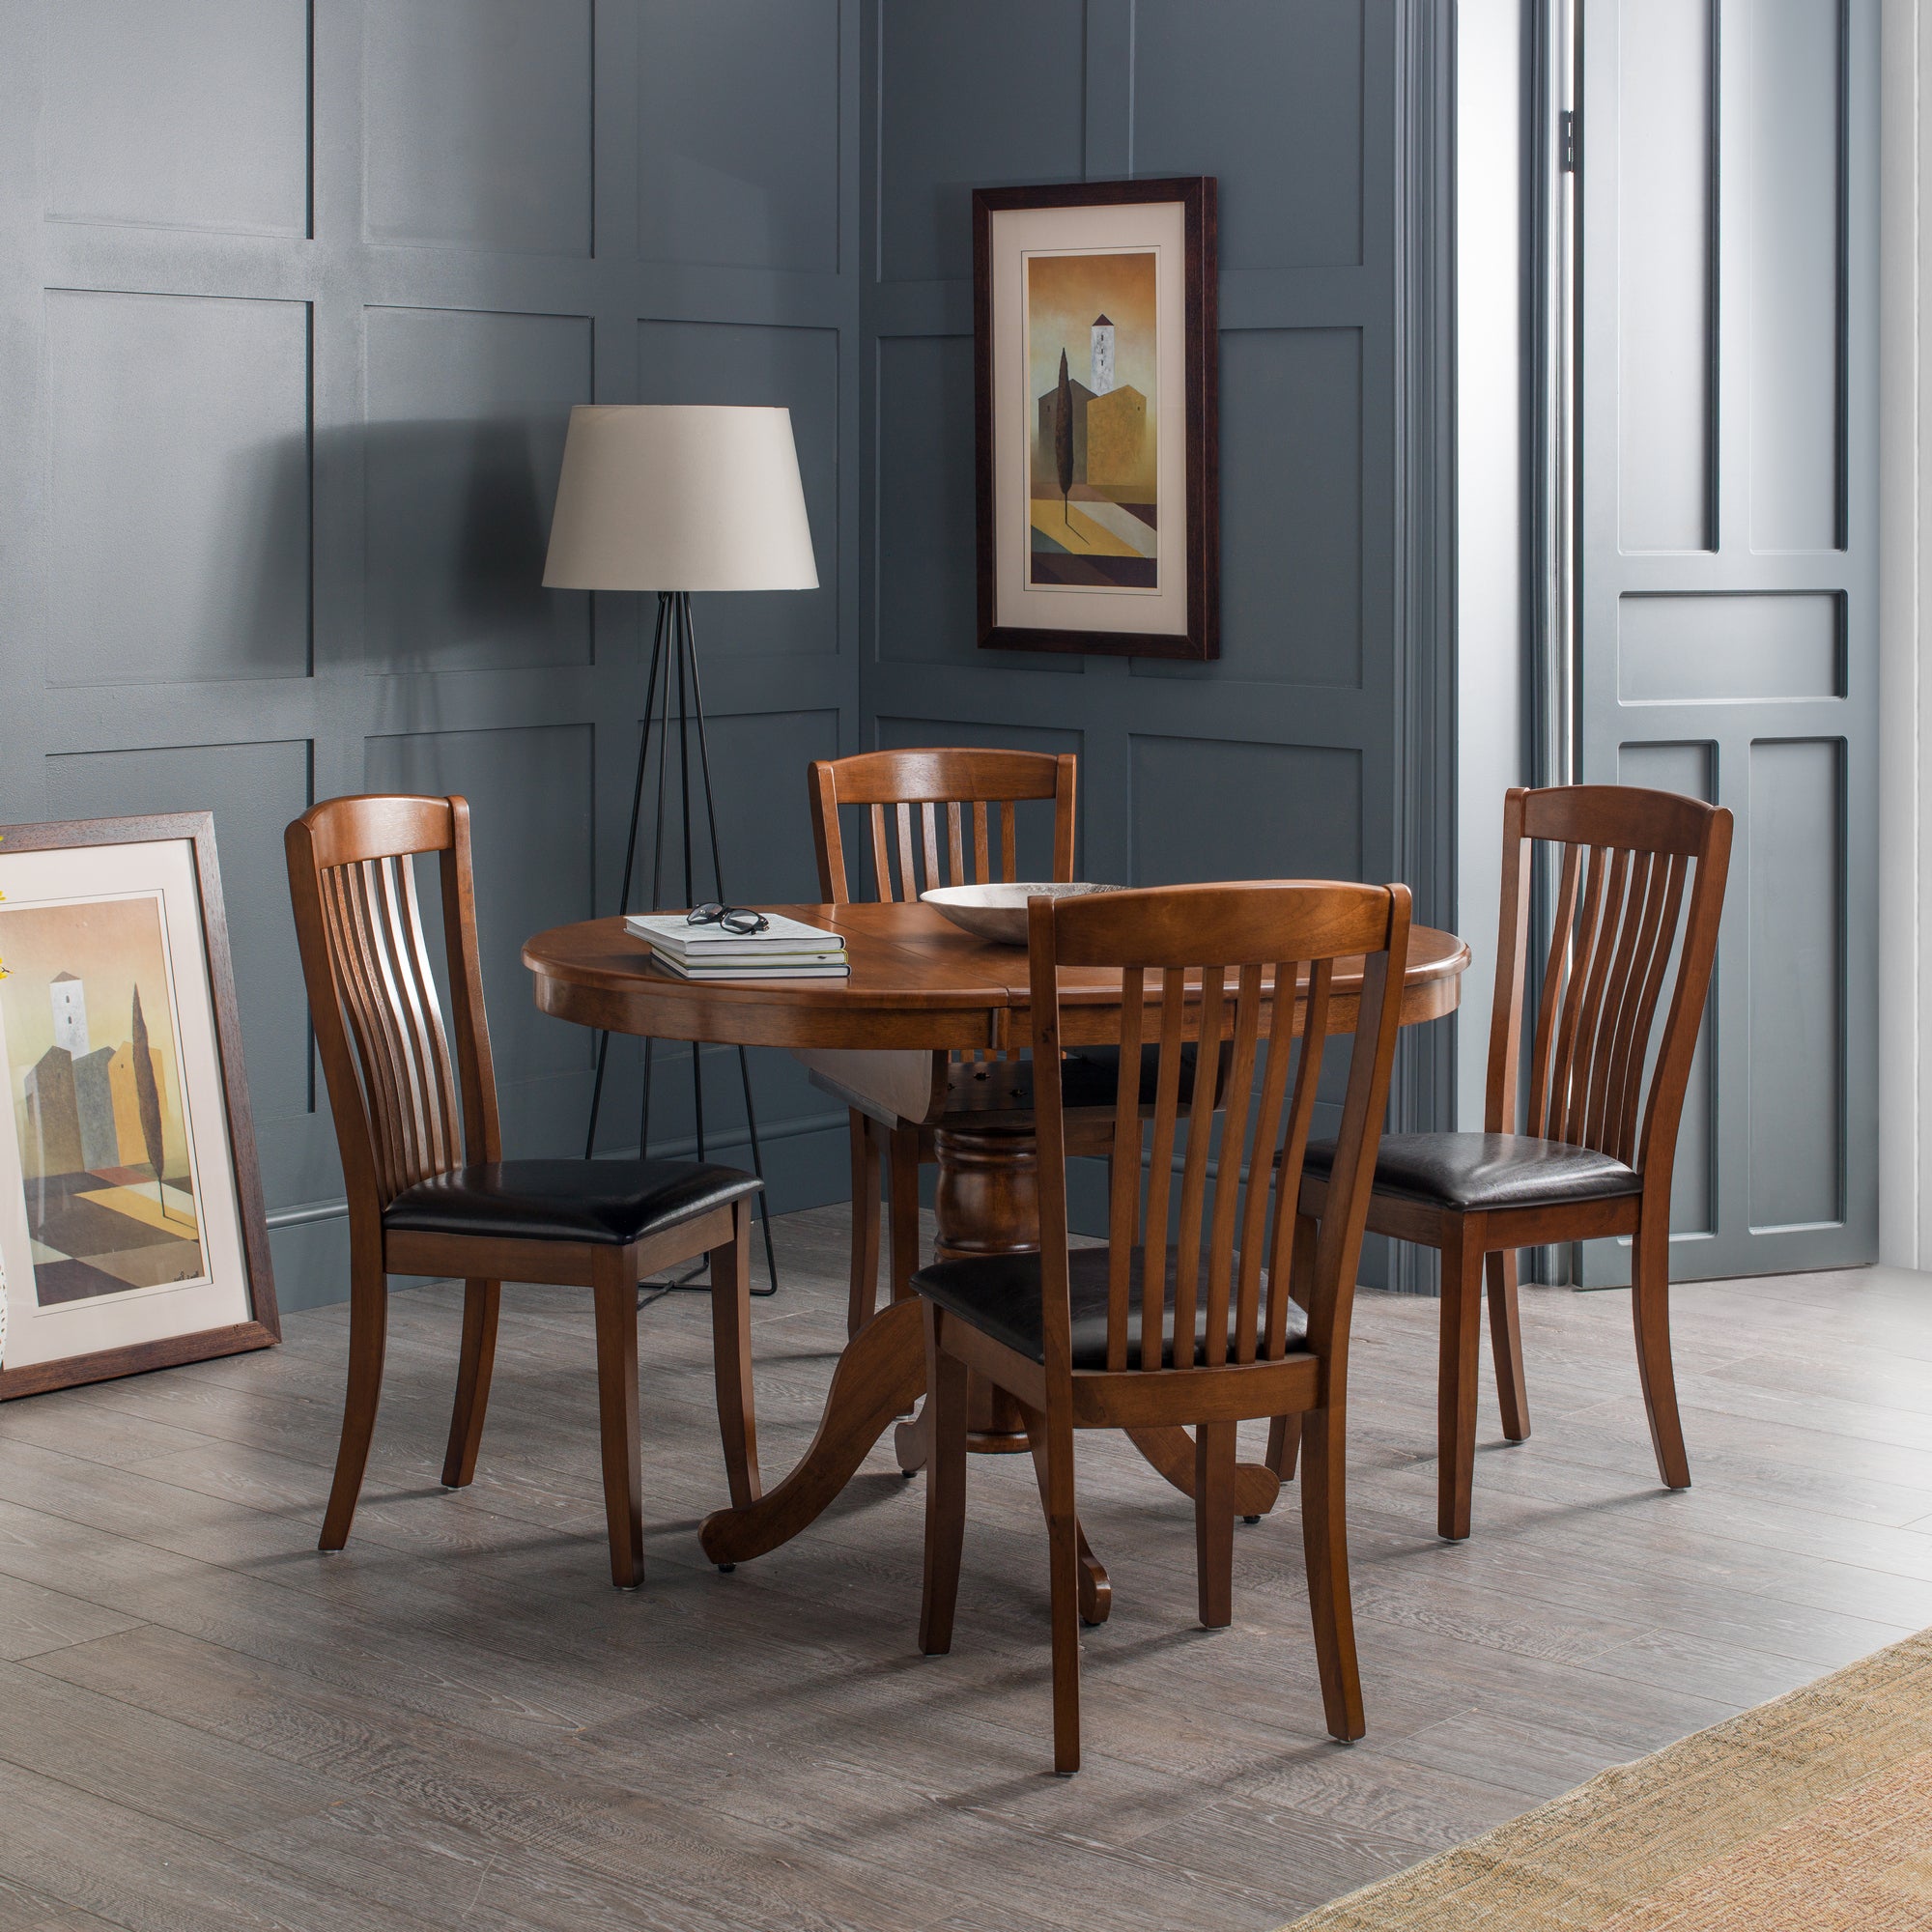 Canterbury Round To Oval Dining Table With 4 Chairs Brown Mahogany Brown